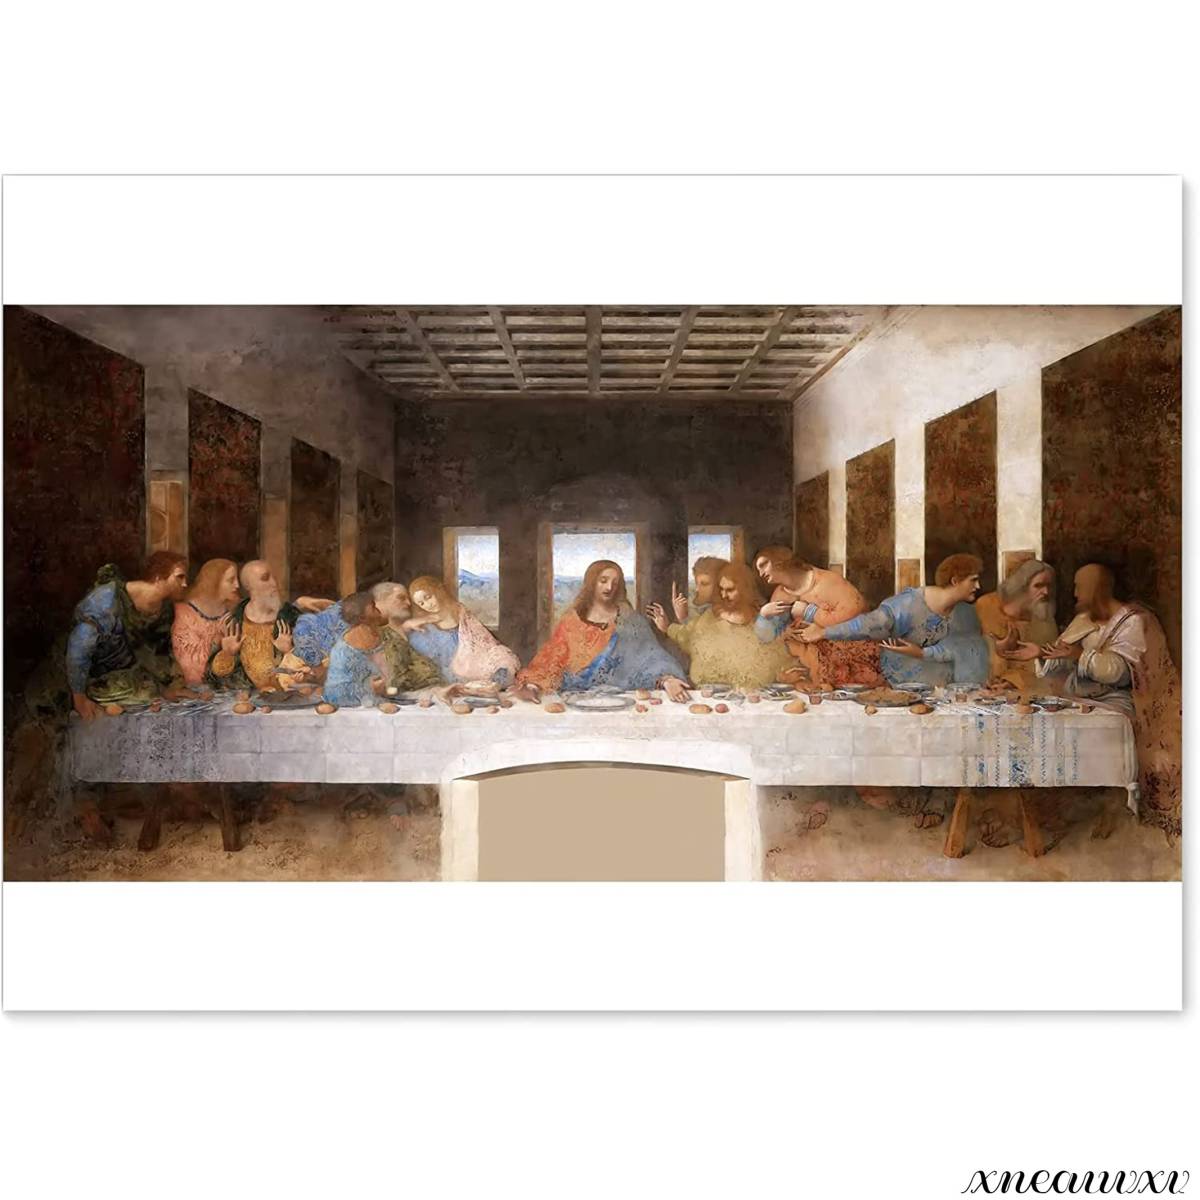 Leonardo da Vinci's The Last Supper Painting Made in Japan A2 Reproduction Masterpiece Interior Wall Hanging Room Decoration Decorative Painting Art Poster Art Fine Art, Painting, Oil painting, Abstract painting